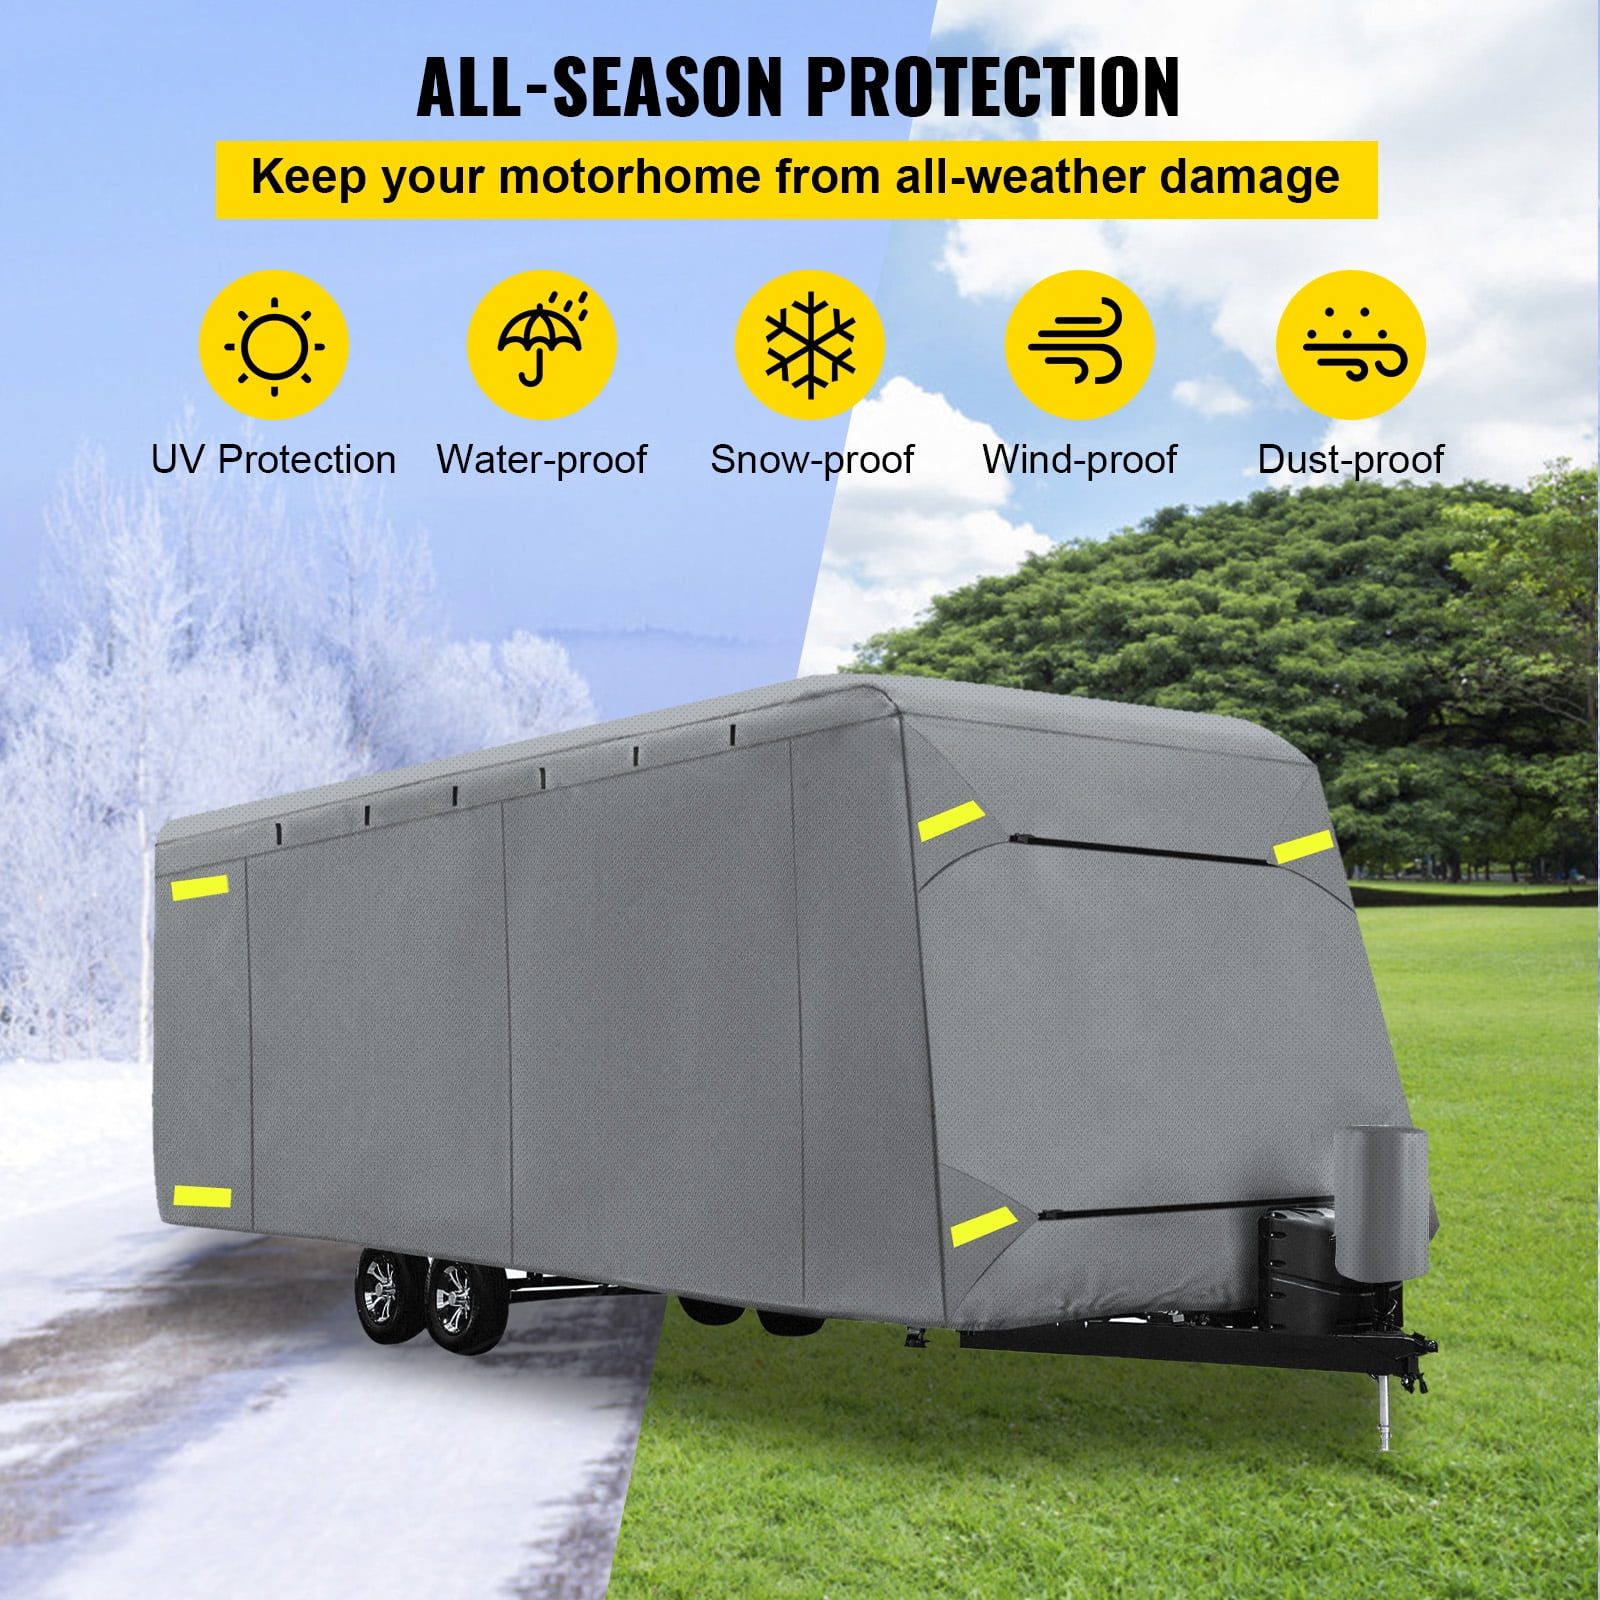 VEVOR RV Cover 8'-10' Travel Trailer RV Cover Windproof RV & Trailer Cover Waterproof Ripstop Anti-UV for RV Motorhome with Adhesive Patch & Storage Bag Extra-Thick 4 Layers Durable Camper Cover 